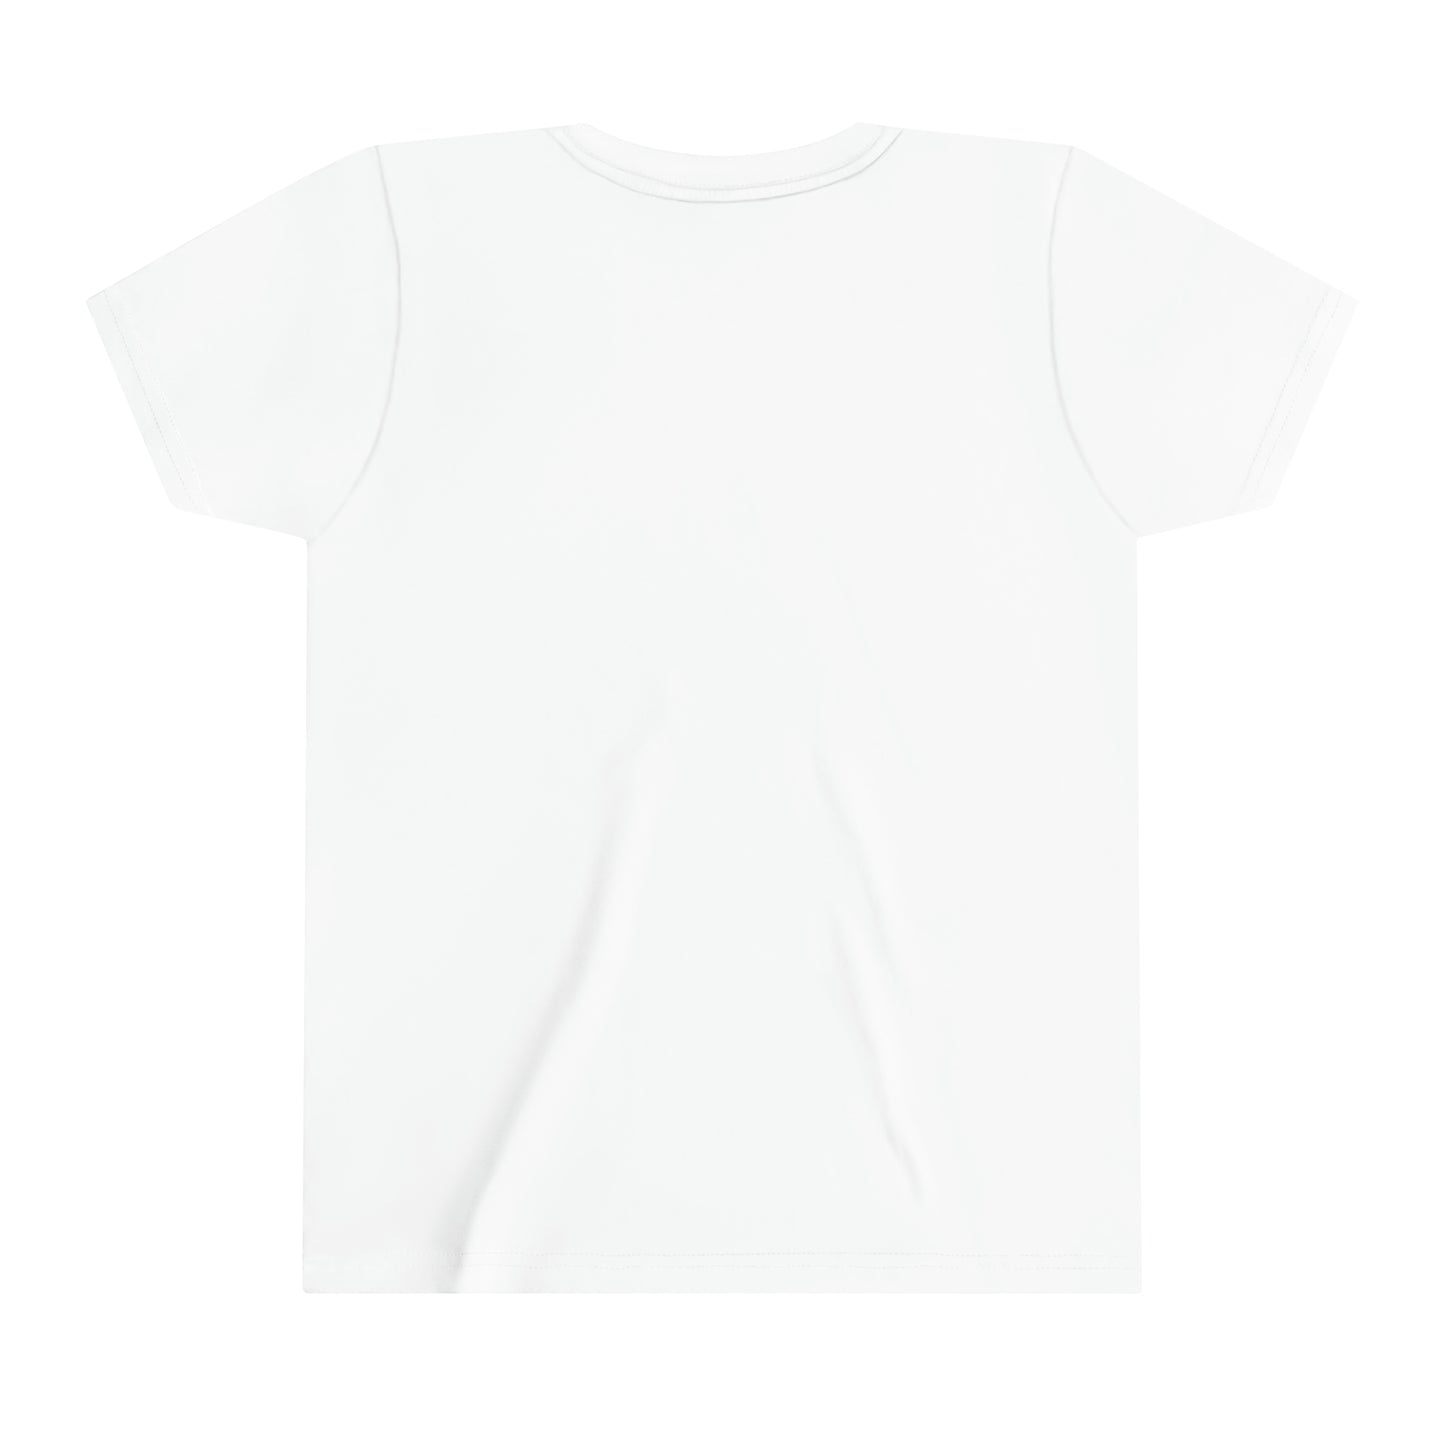 Lean Into It Youth Short Sleeve T-Shirt